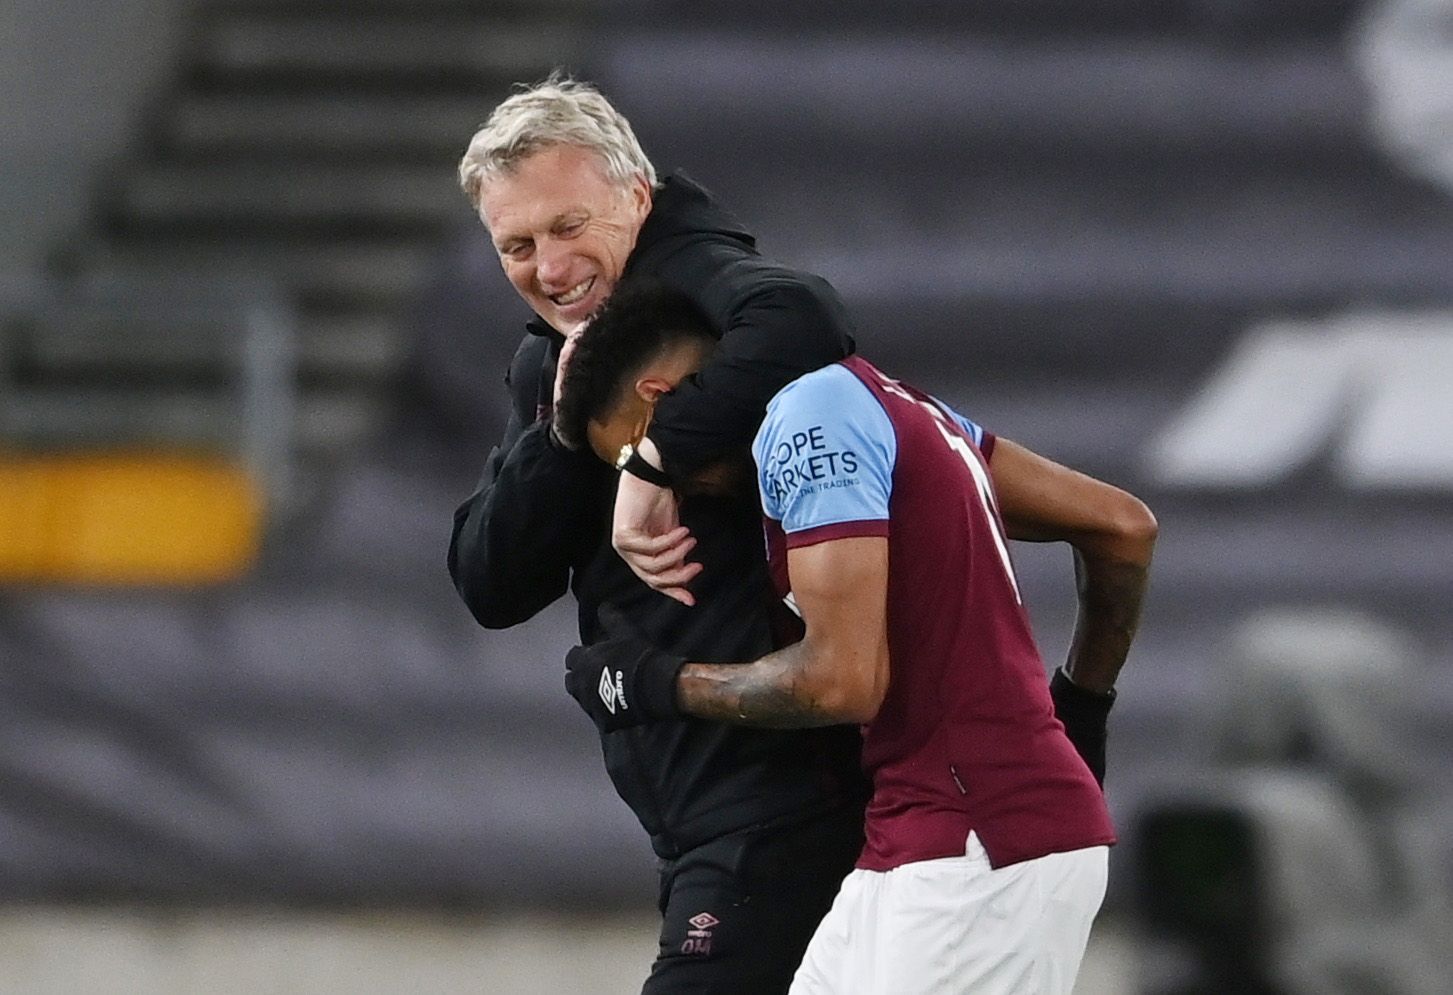 Soccer Football - Premier League - Wolverhampton Wanderers v West Ham United - Molineux Stadium, Wolverhampton, Britain - April 5, 2021 West Ham United's Jesse Lingard celebrates with manager David Moyes after the match Pool via REUTERS/Laurence Griffiths EDITORIAL USE ONLY. No use with unauthorized audio, video, data, fixture lists, club/league logos or 'live' services. Online in-match use limited to 75 images, no video emulation. No use in betting, games or single club /league/player publicati